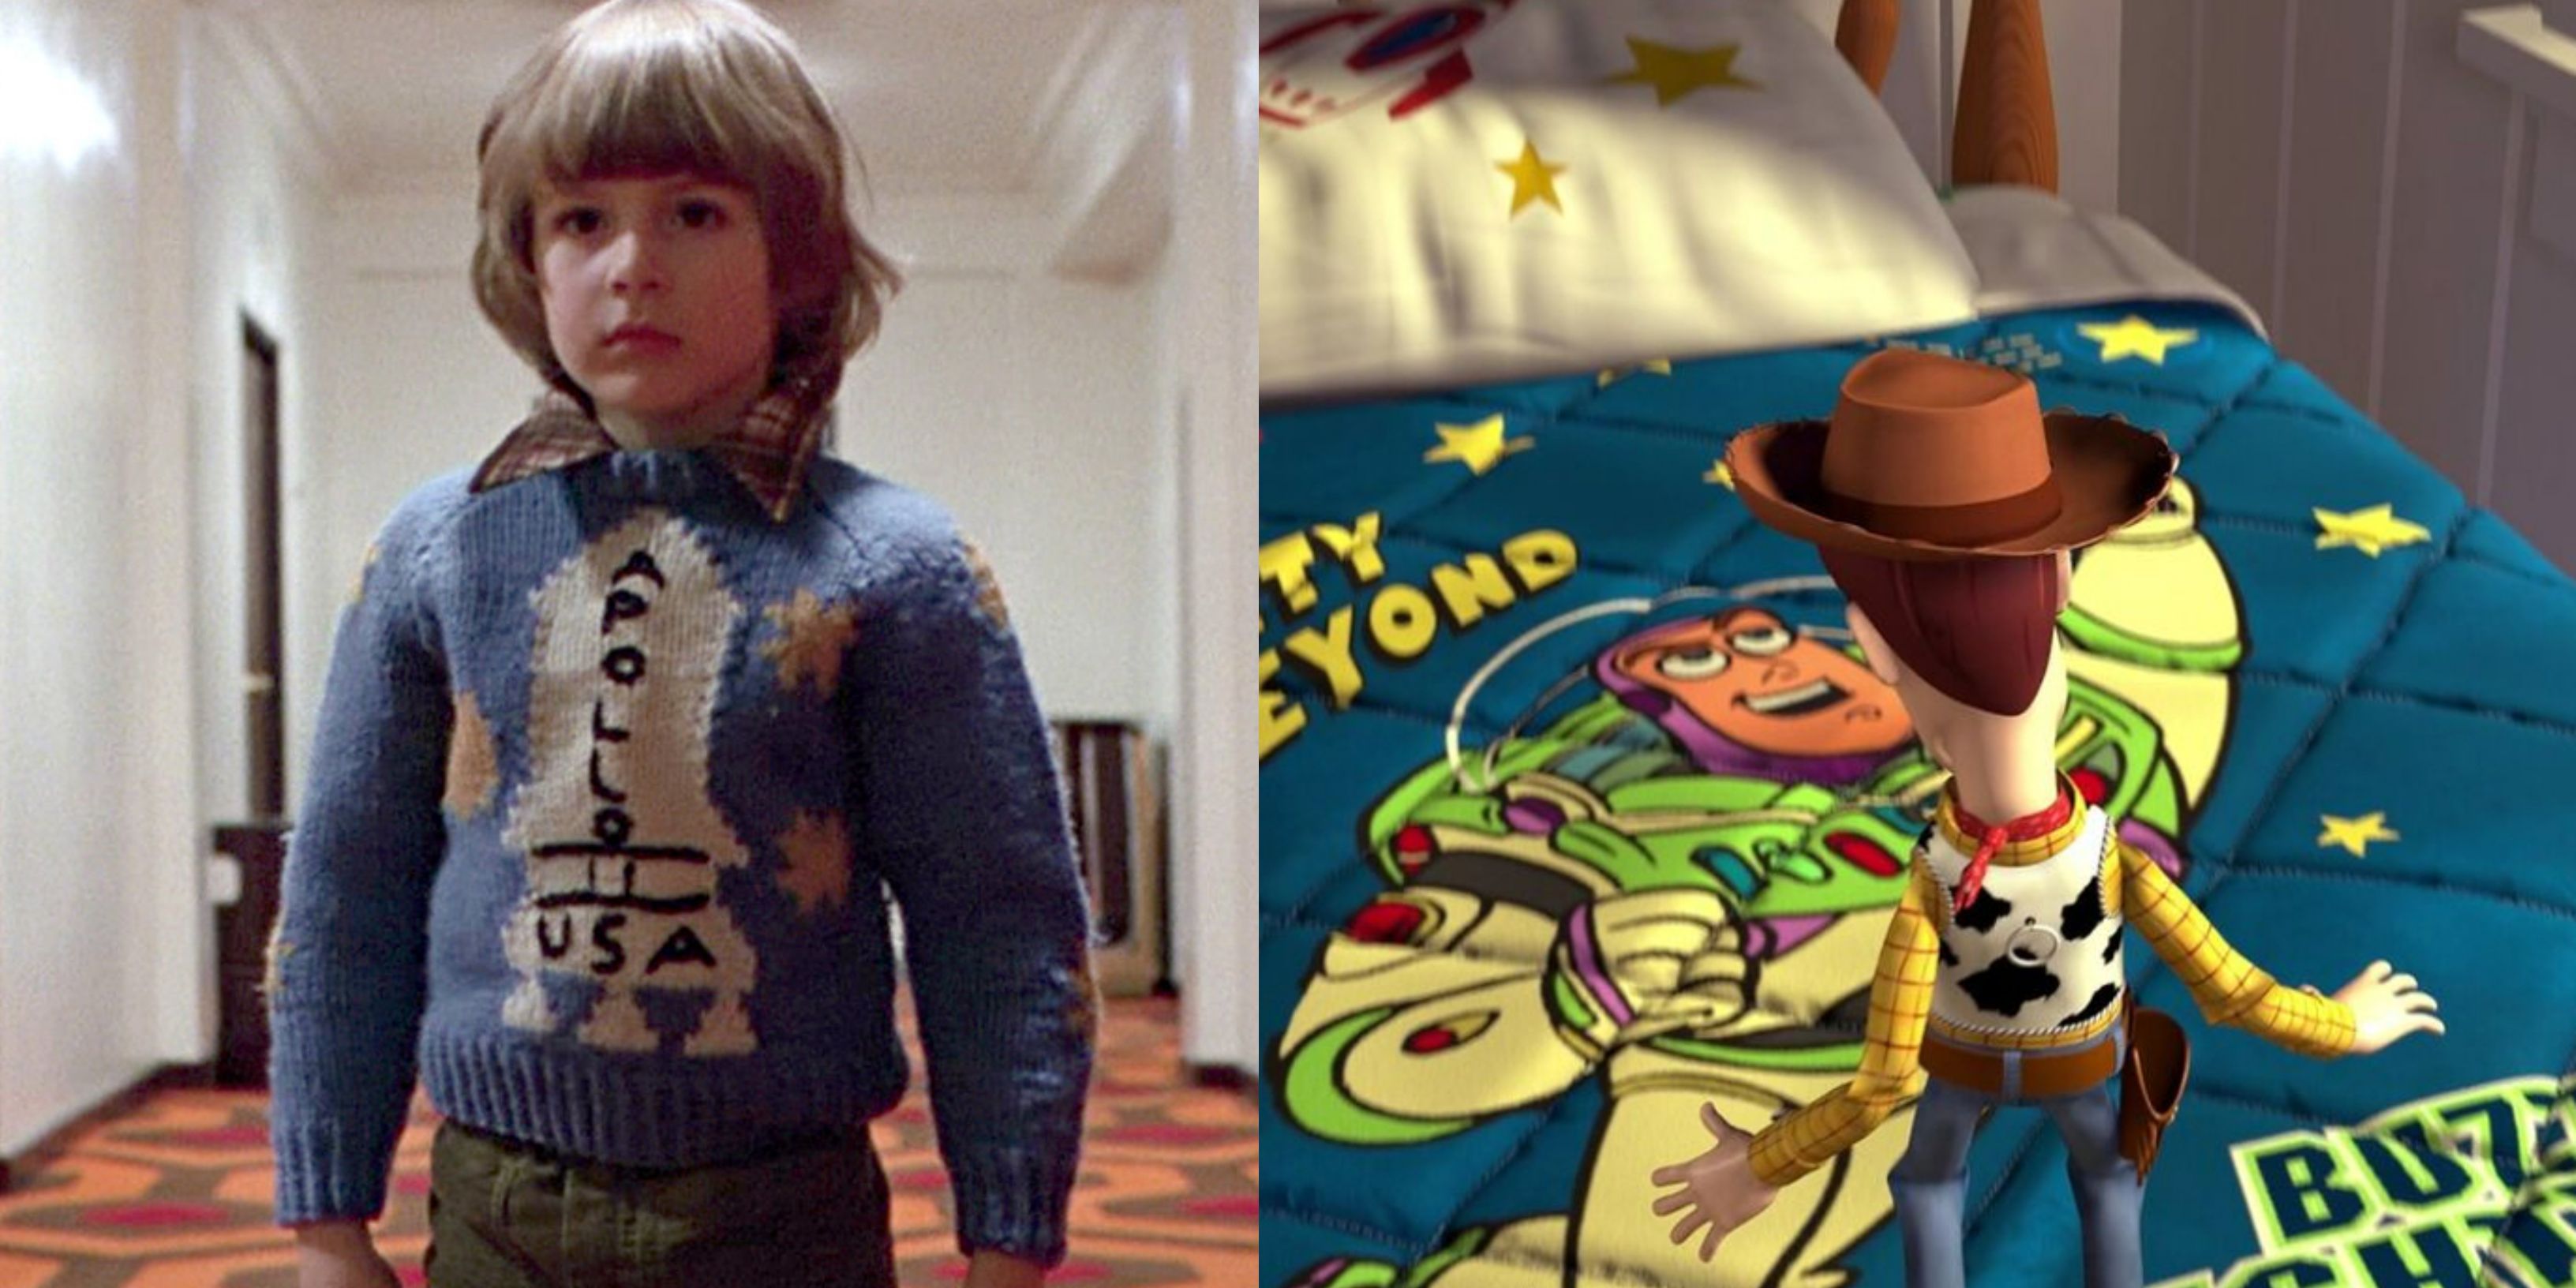 Every The Shining Easter Egg In Pixar’s Toy Story Movies